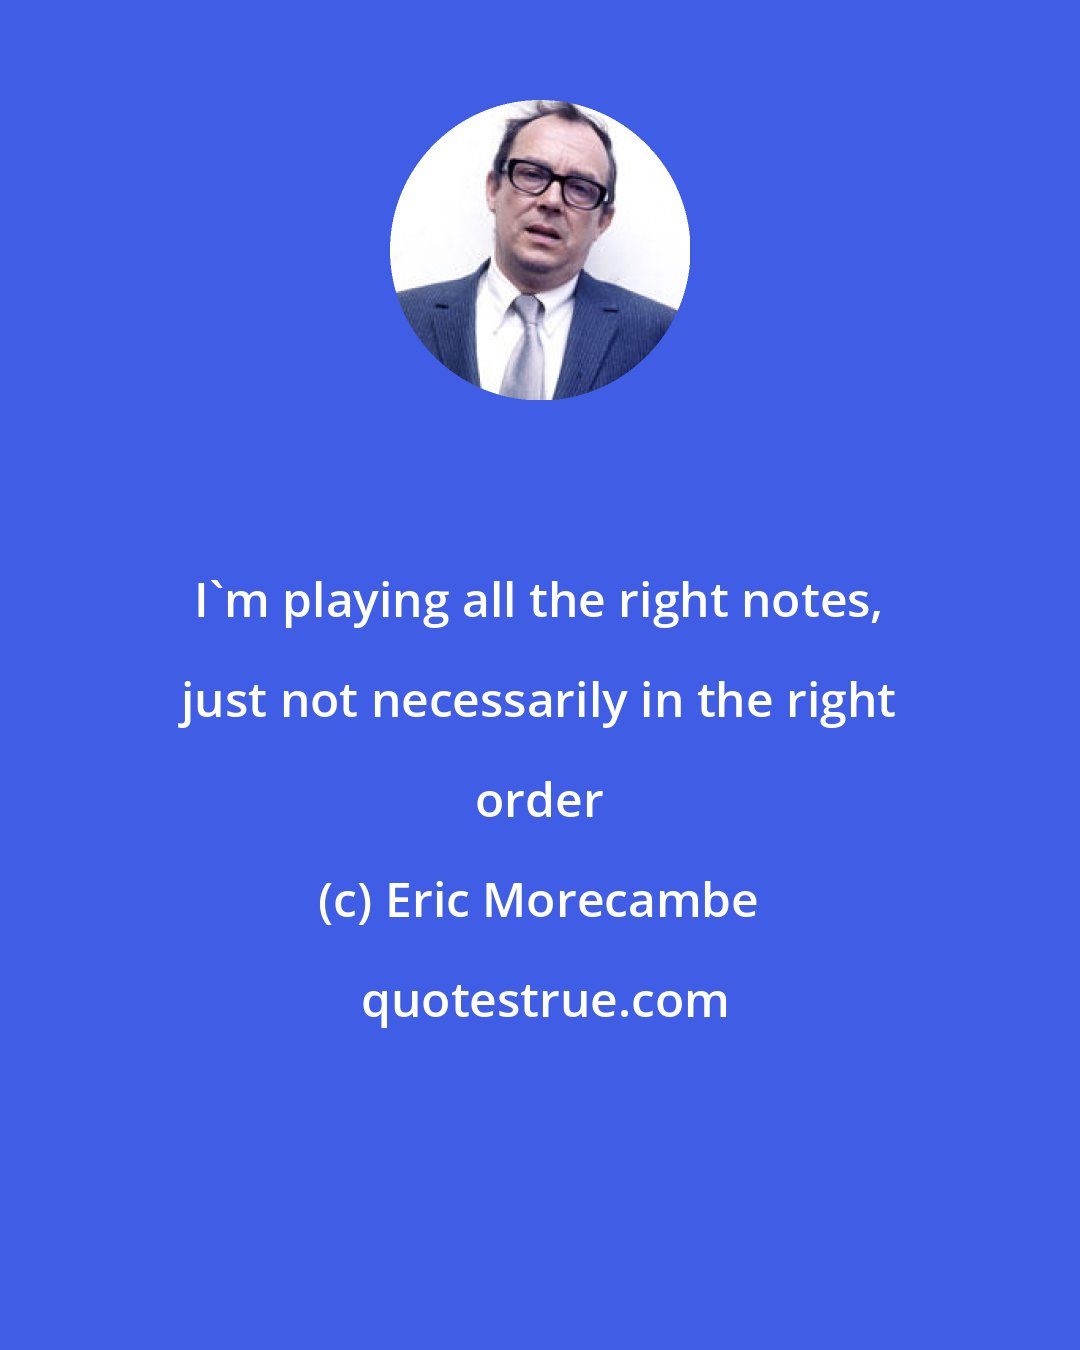 Eric Morecambe: I'm playing all the right notes, just not necessarily in the right order